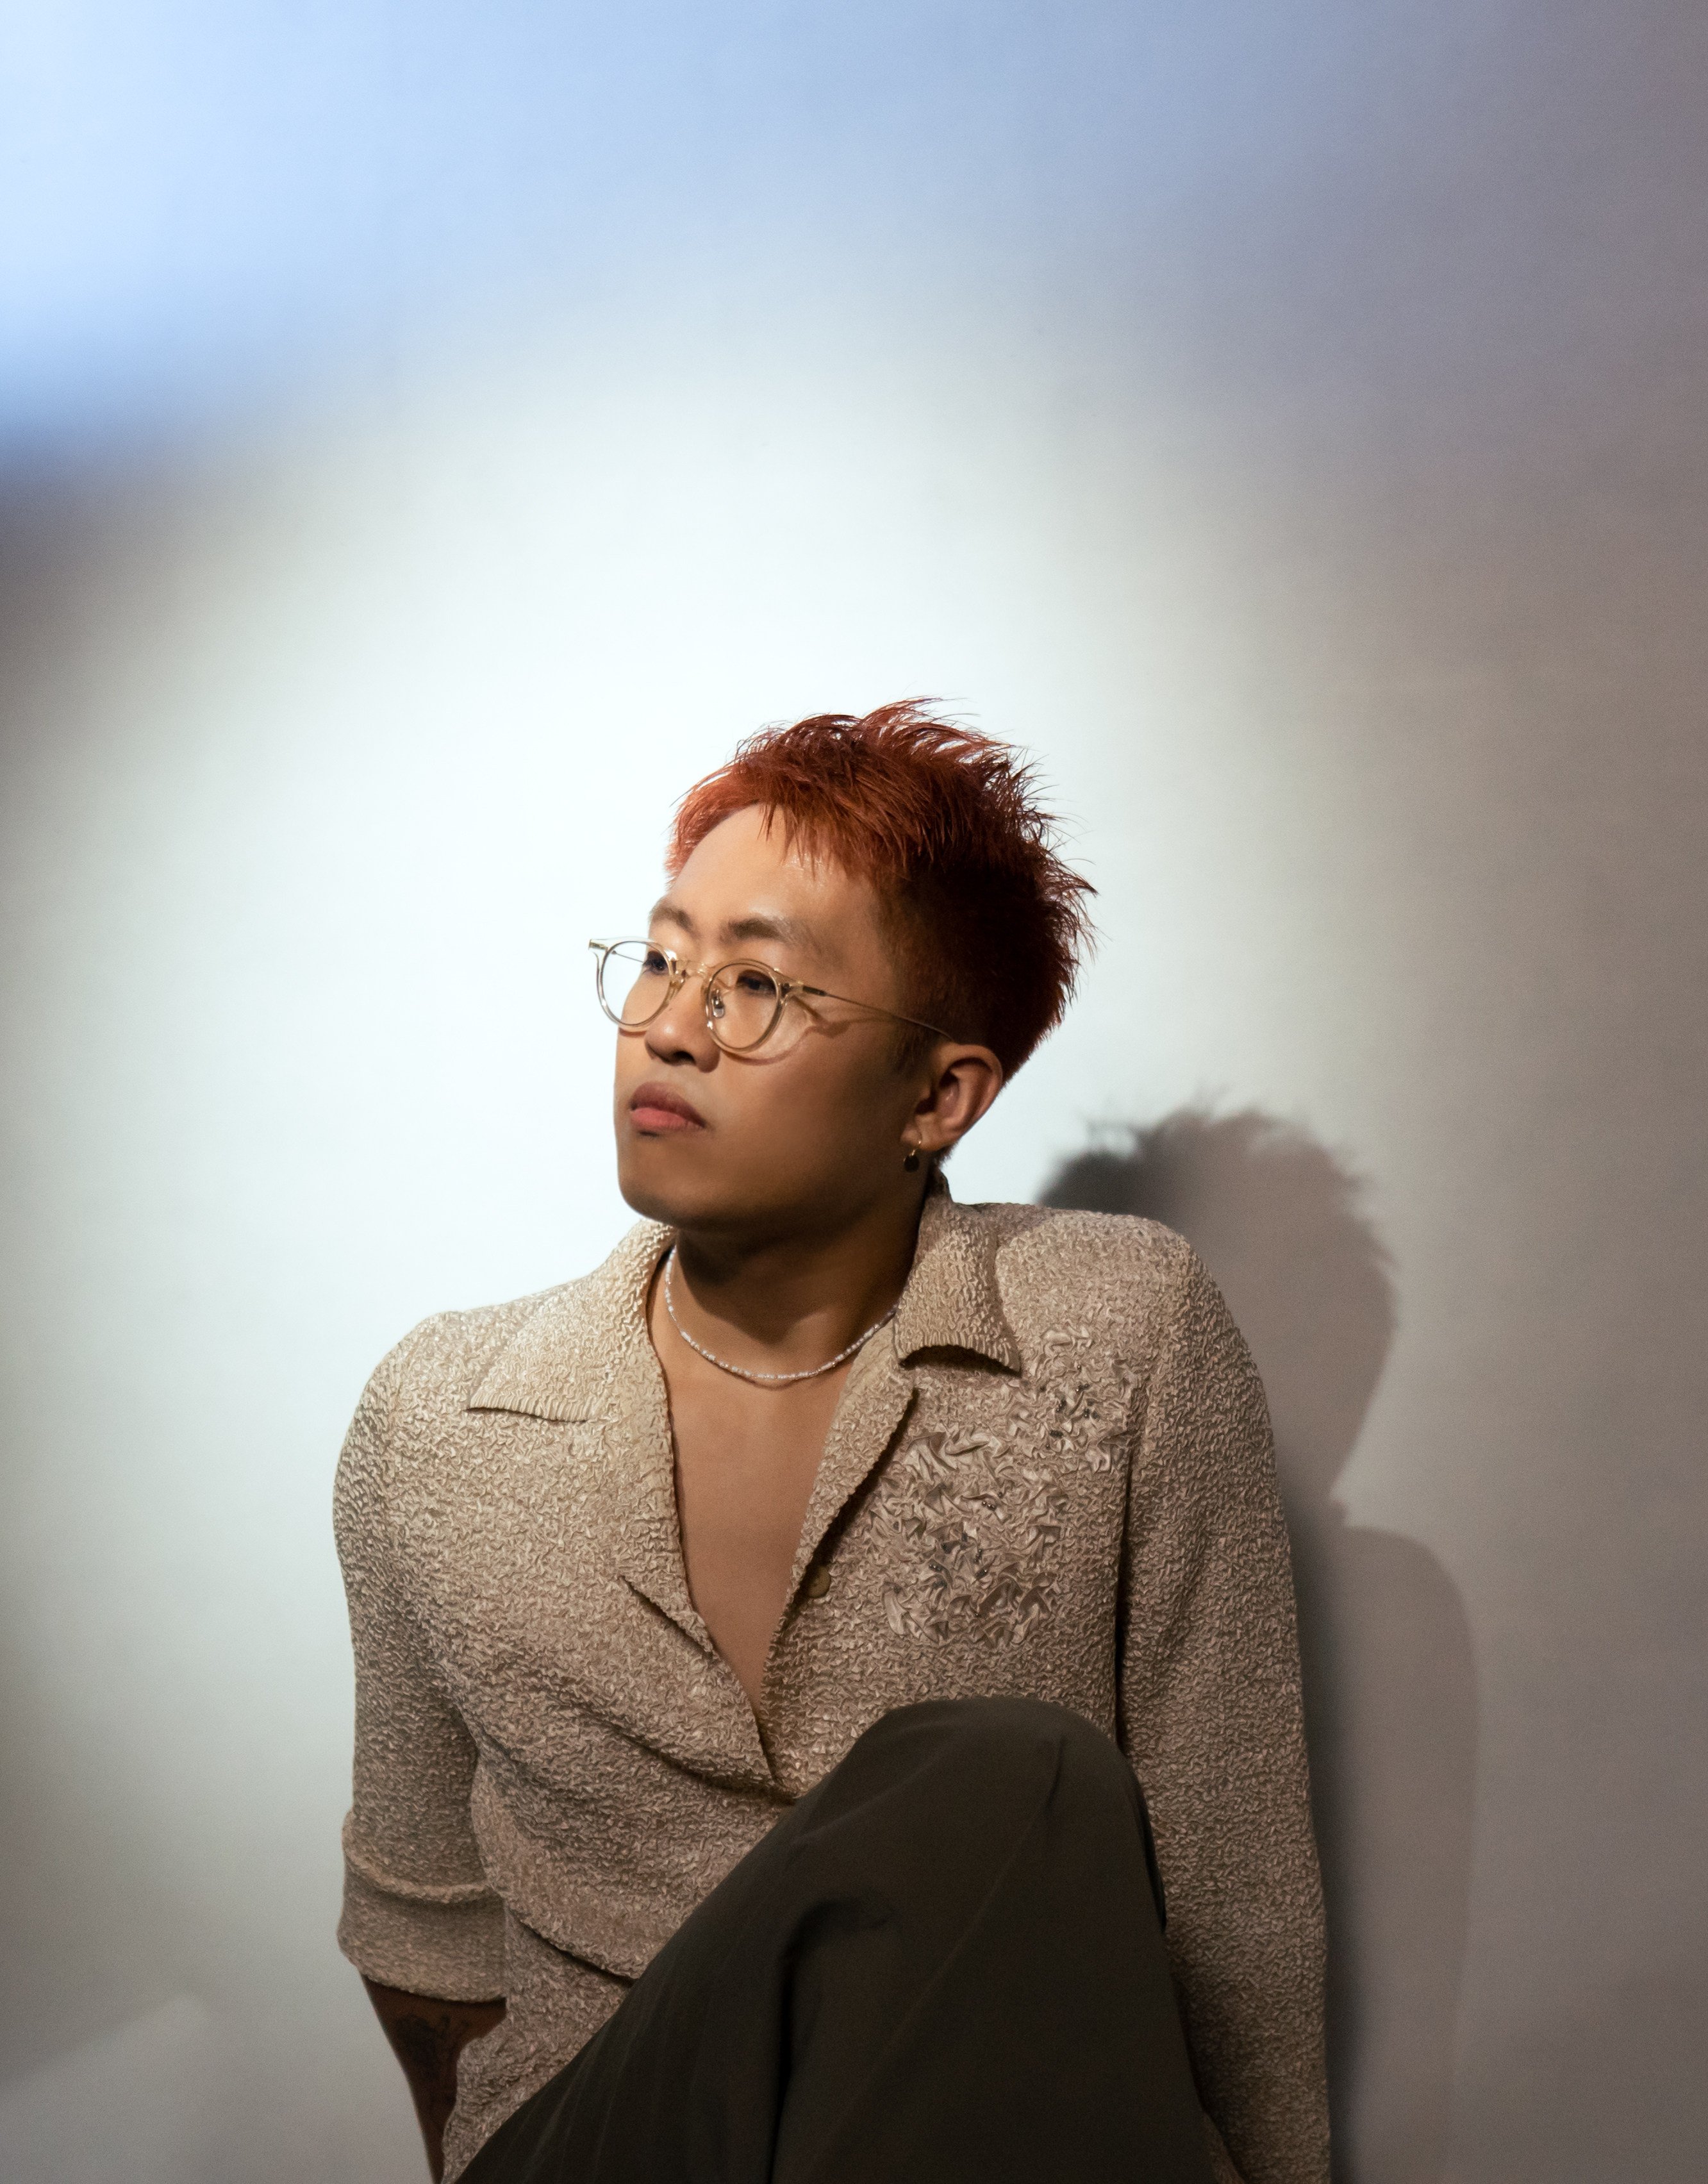 Leo1Bee grew up in northeast China and attended Peking University before joining the Berklee College of Music. He talks about his album Wilderness. Photo: Leo1Bee